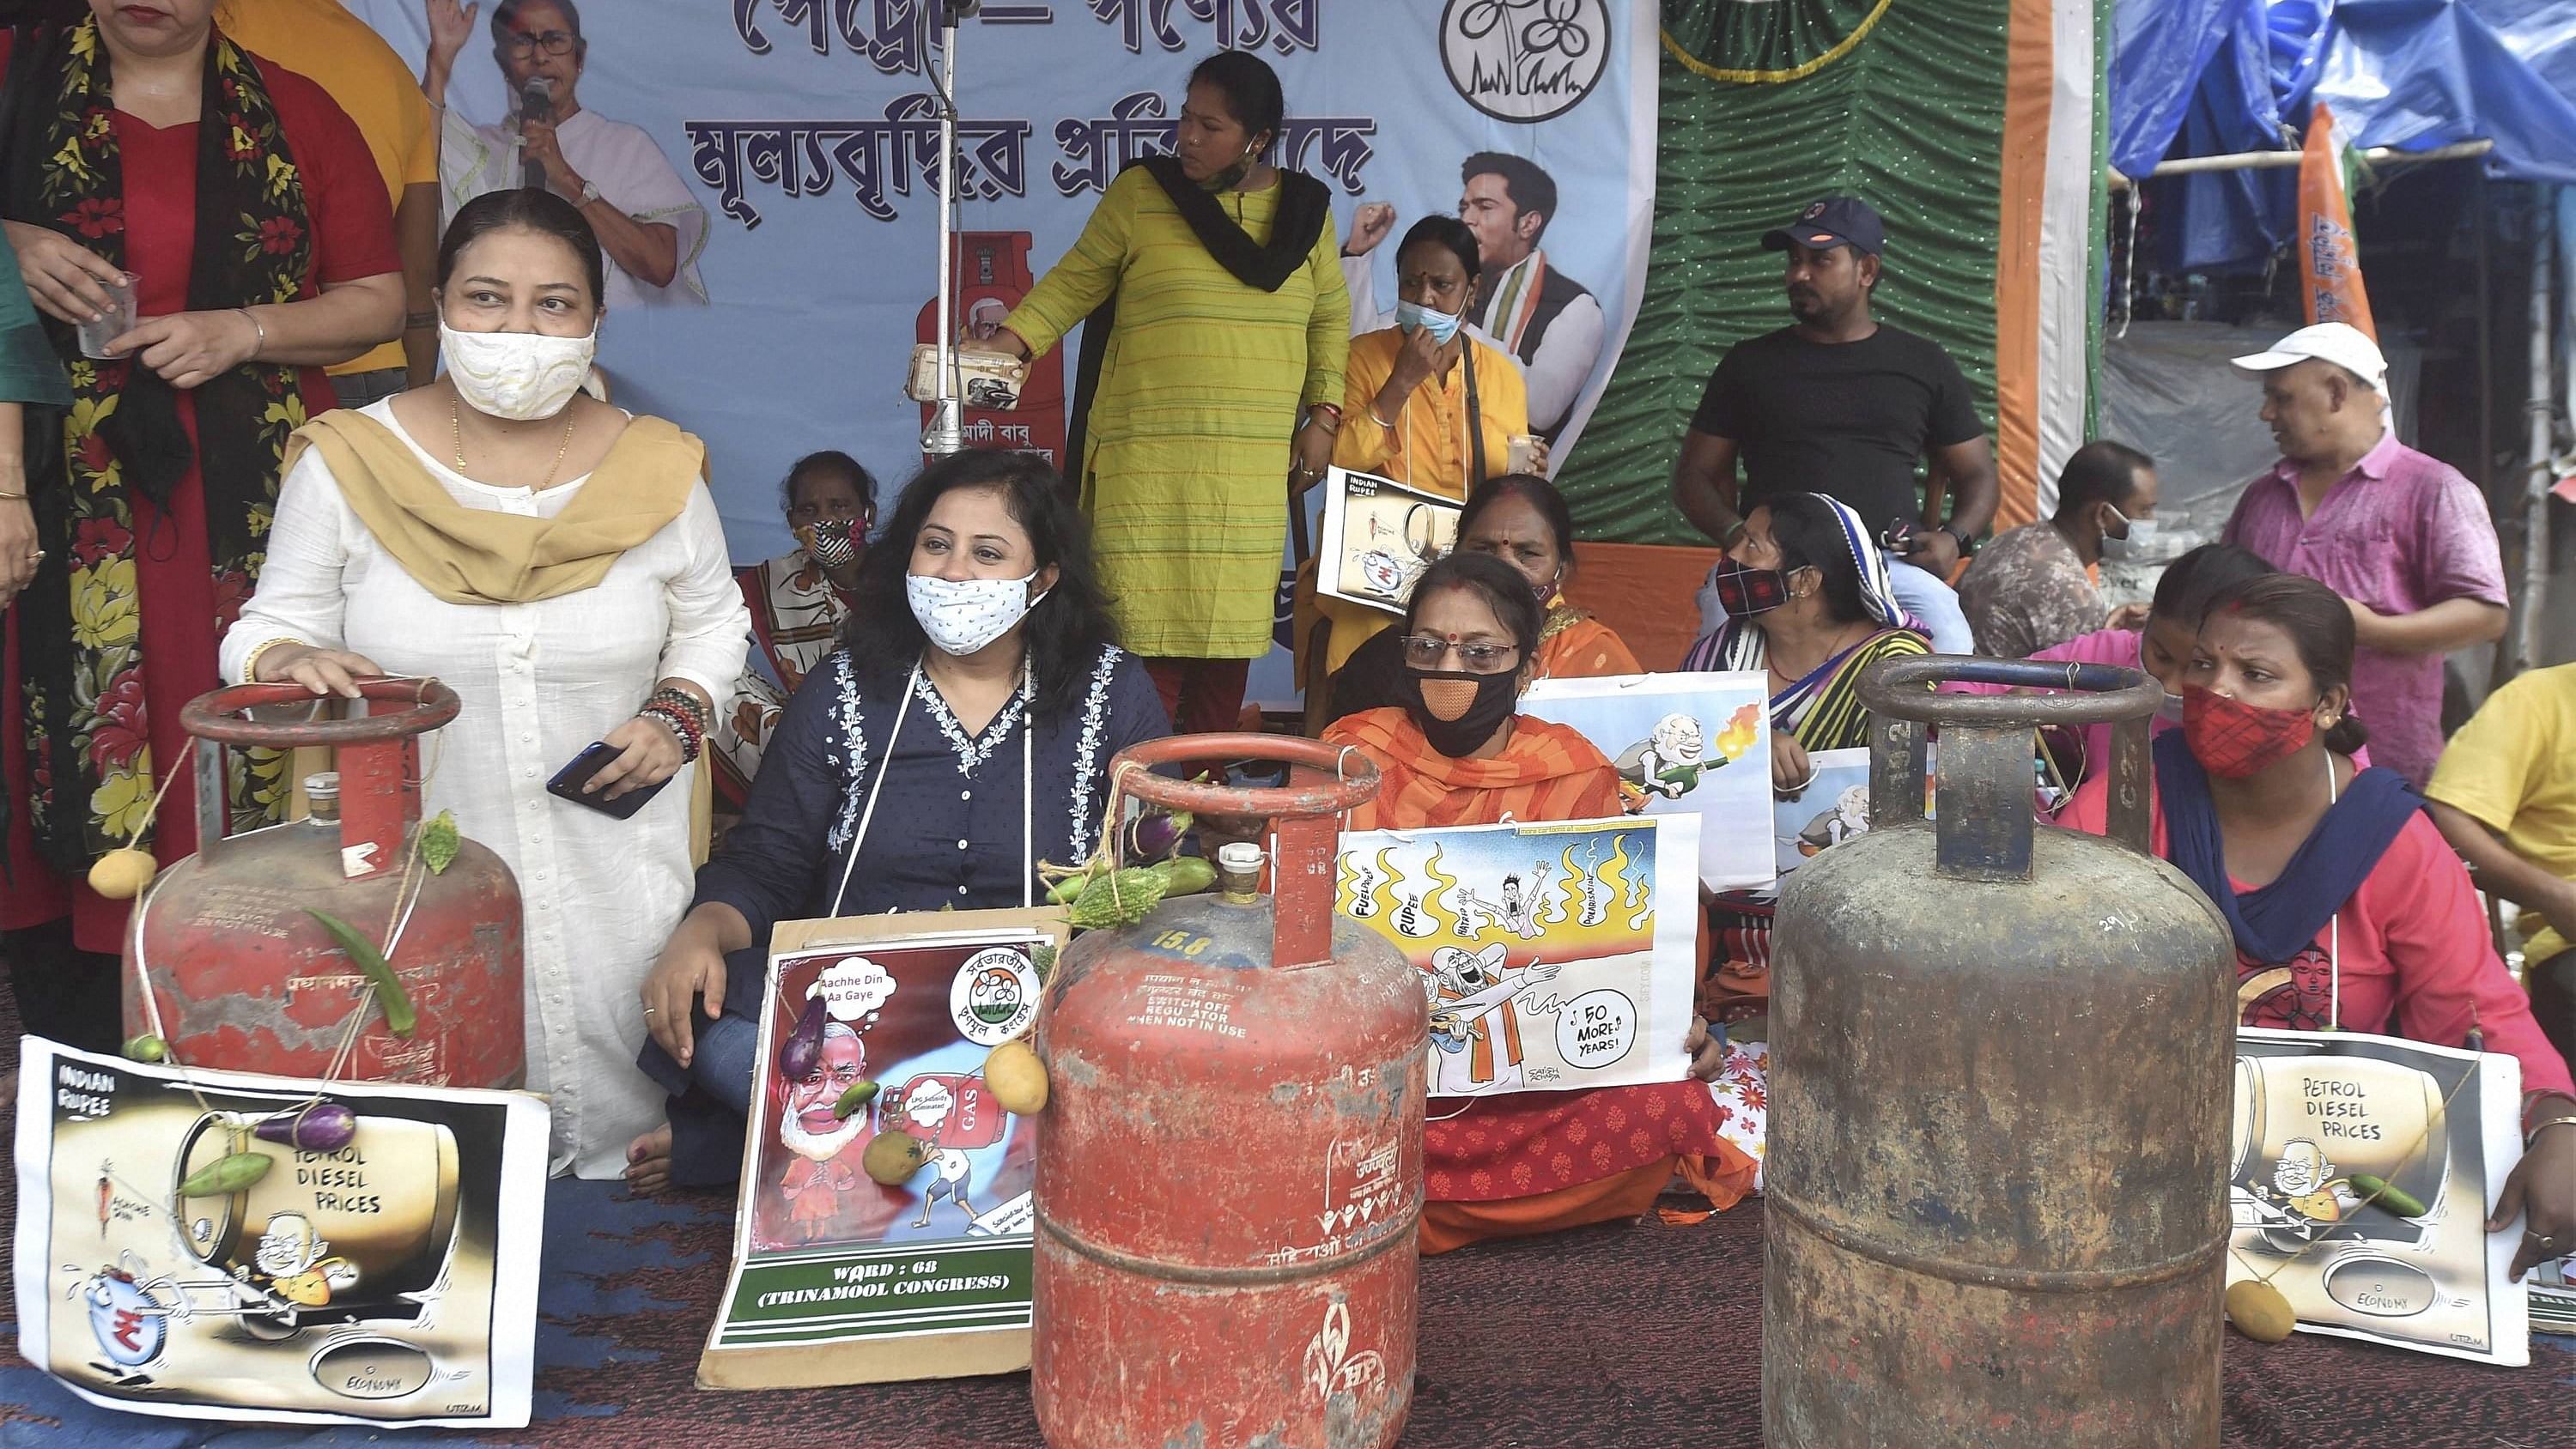 TMC activists with posters and cylinders protest against fuel and LPG prices in Kolkata. Credit: PTI Photo